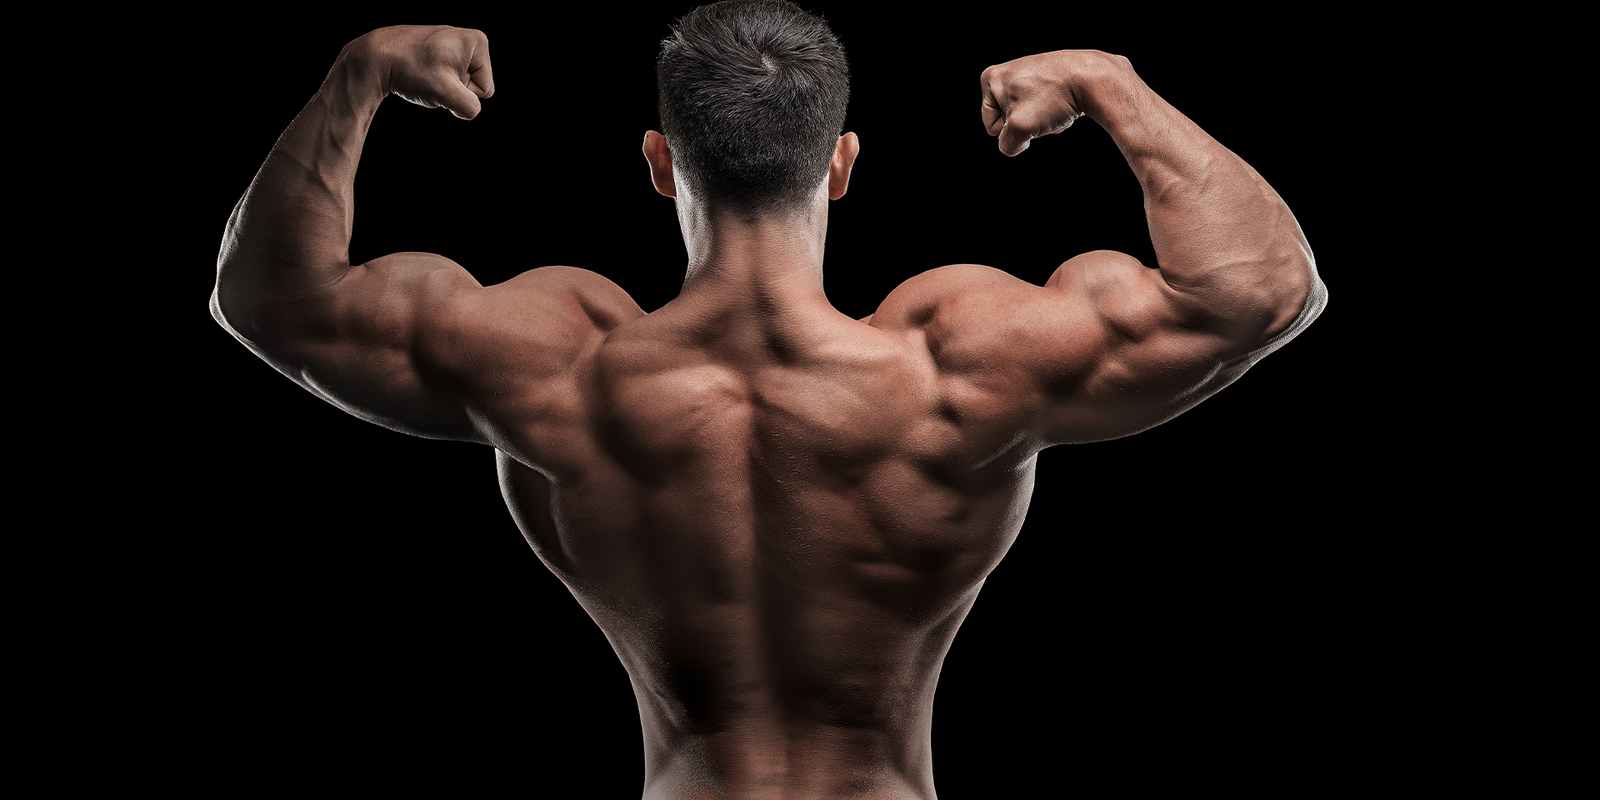 Bulking vs. Cutting: What is the difference?